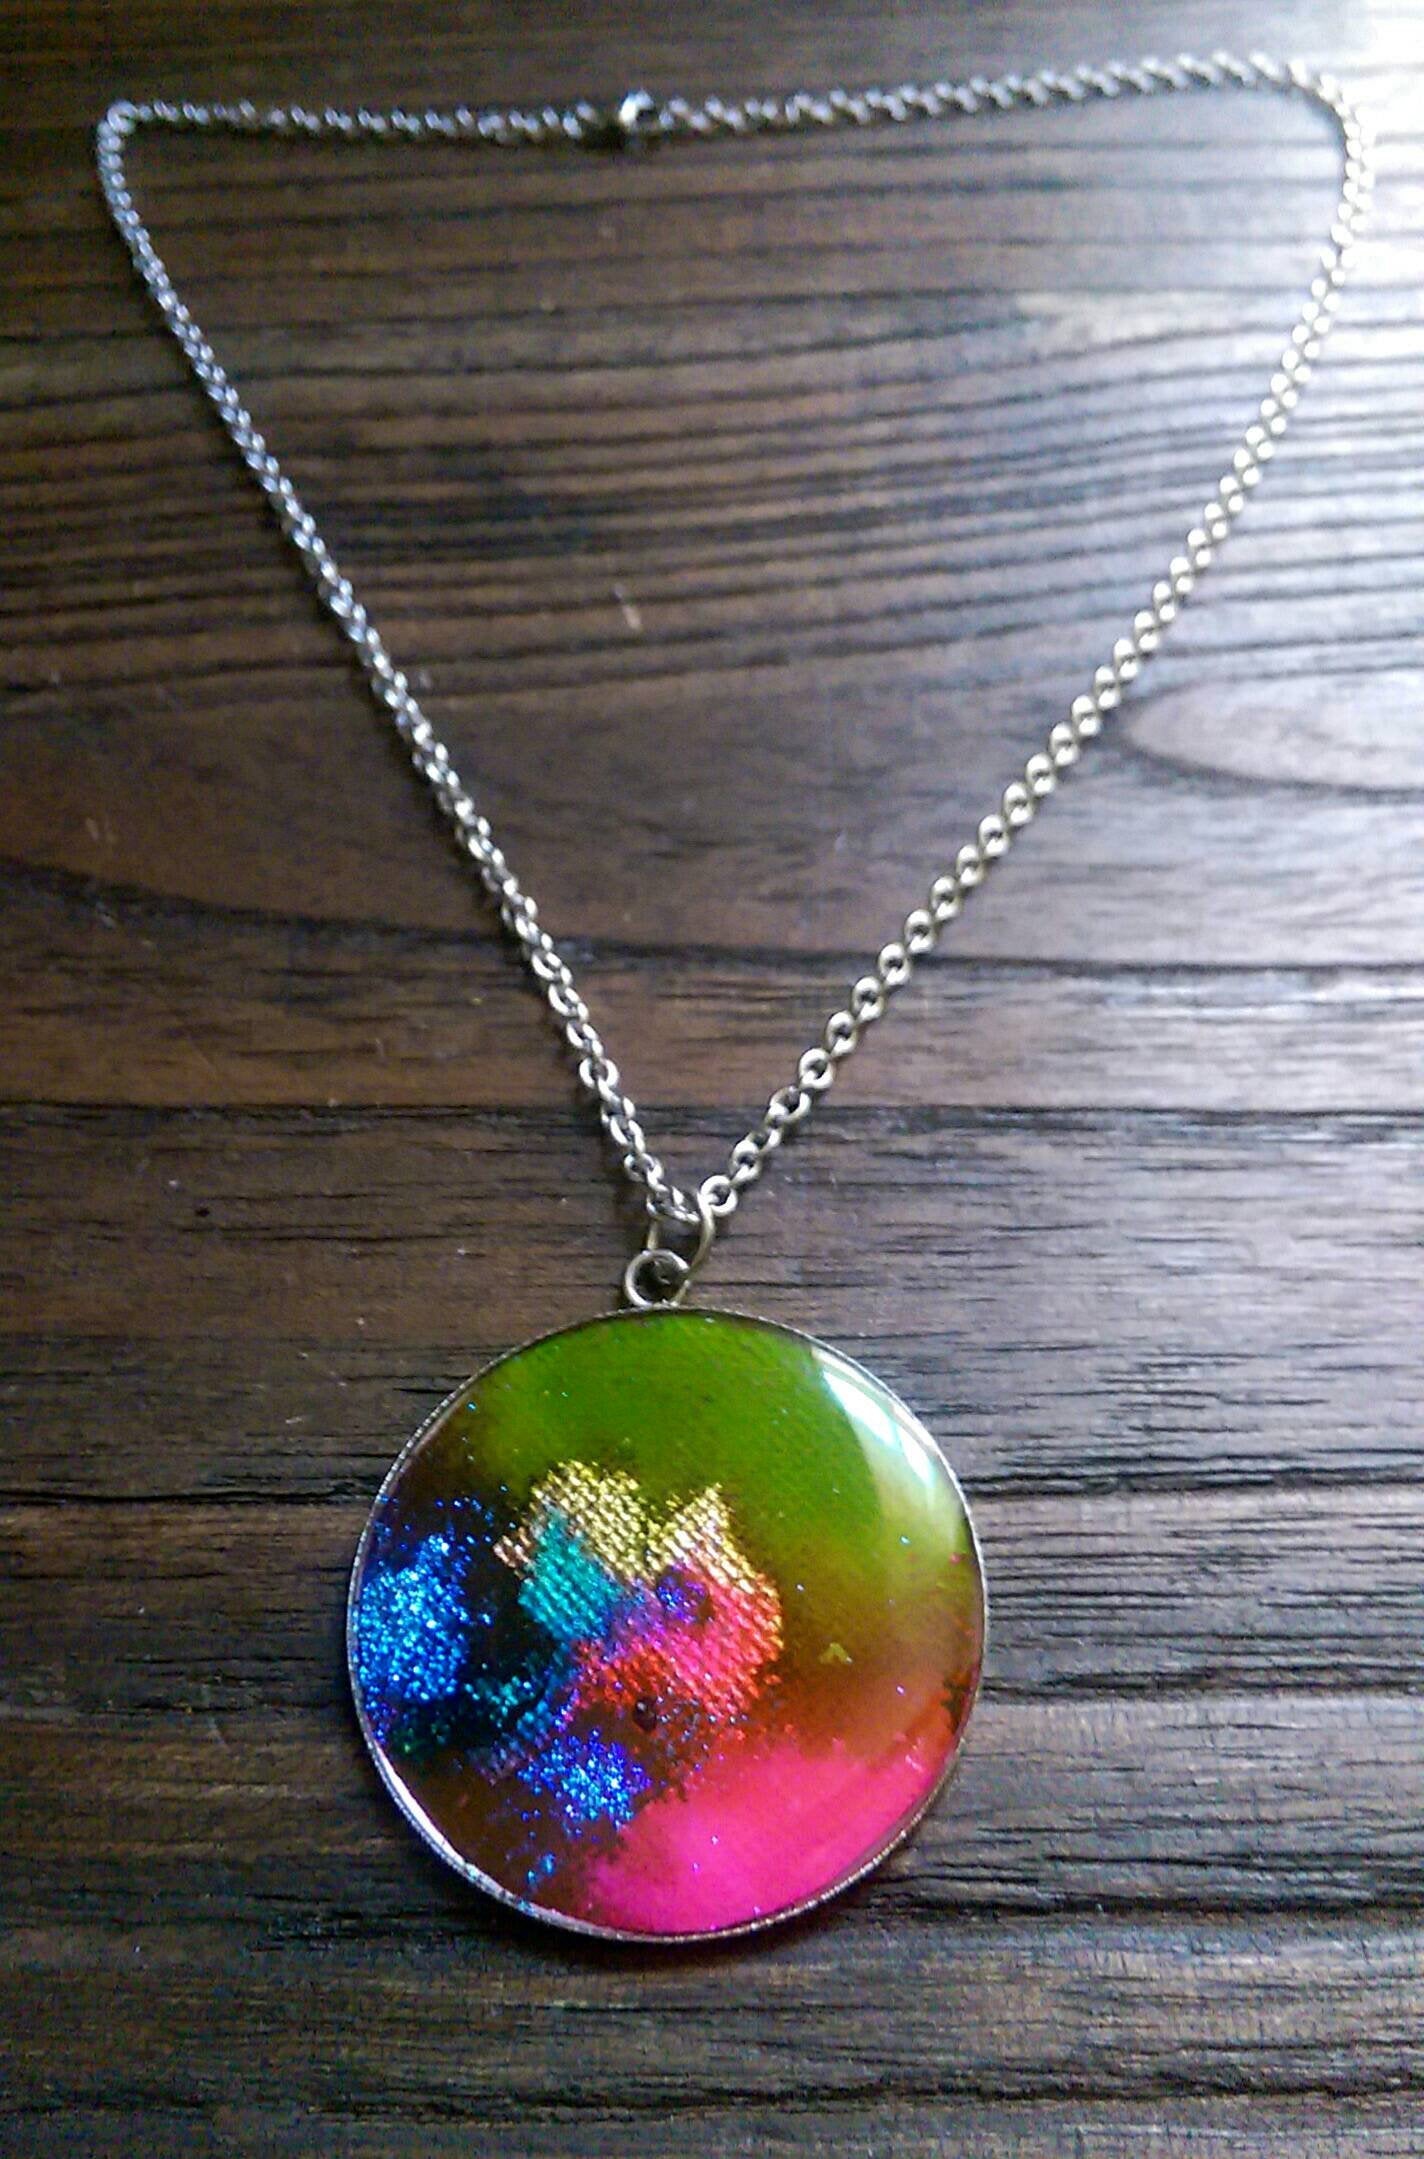 Resin Circle Pendant Necklace, Lime Green Purple Pink Blue Turquoise Gold mix glitter Stainless Steel. 40mm Pendant, Statement Necklace